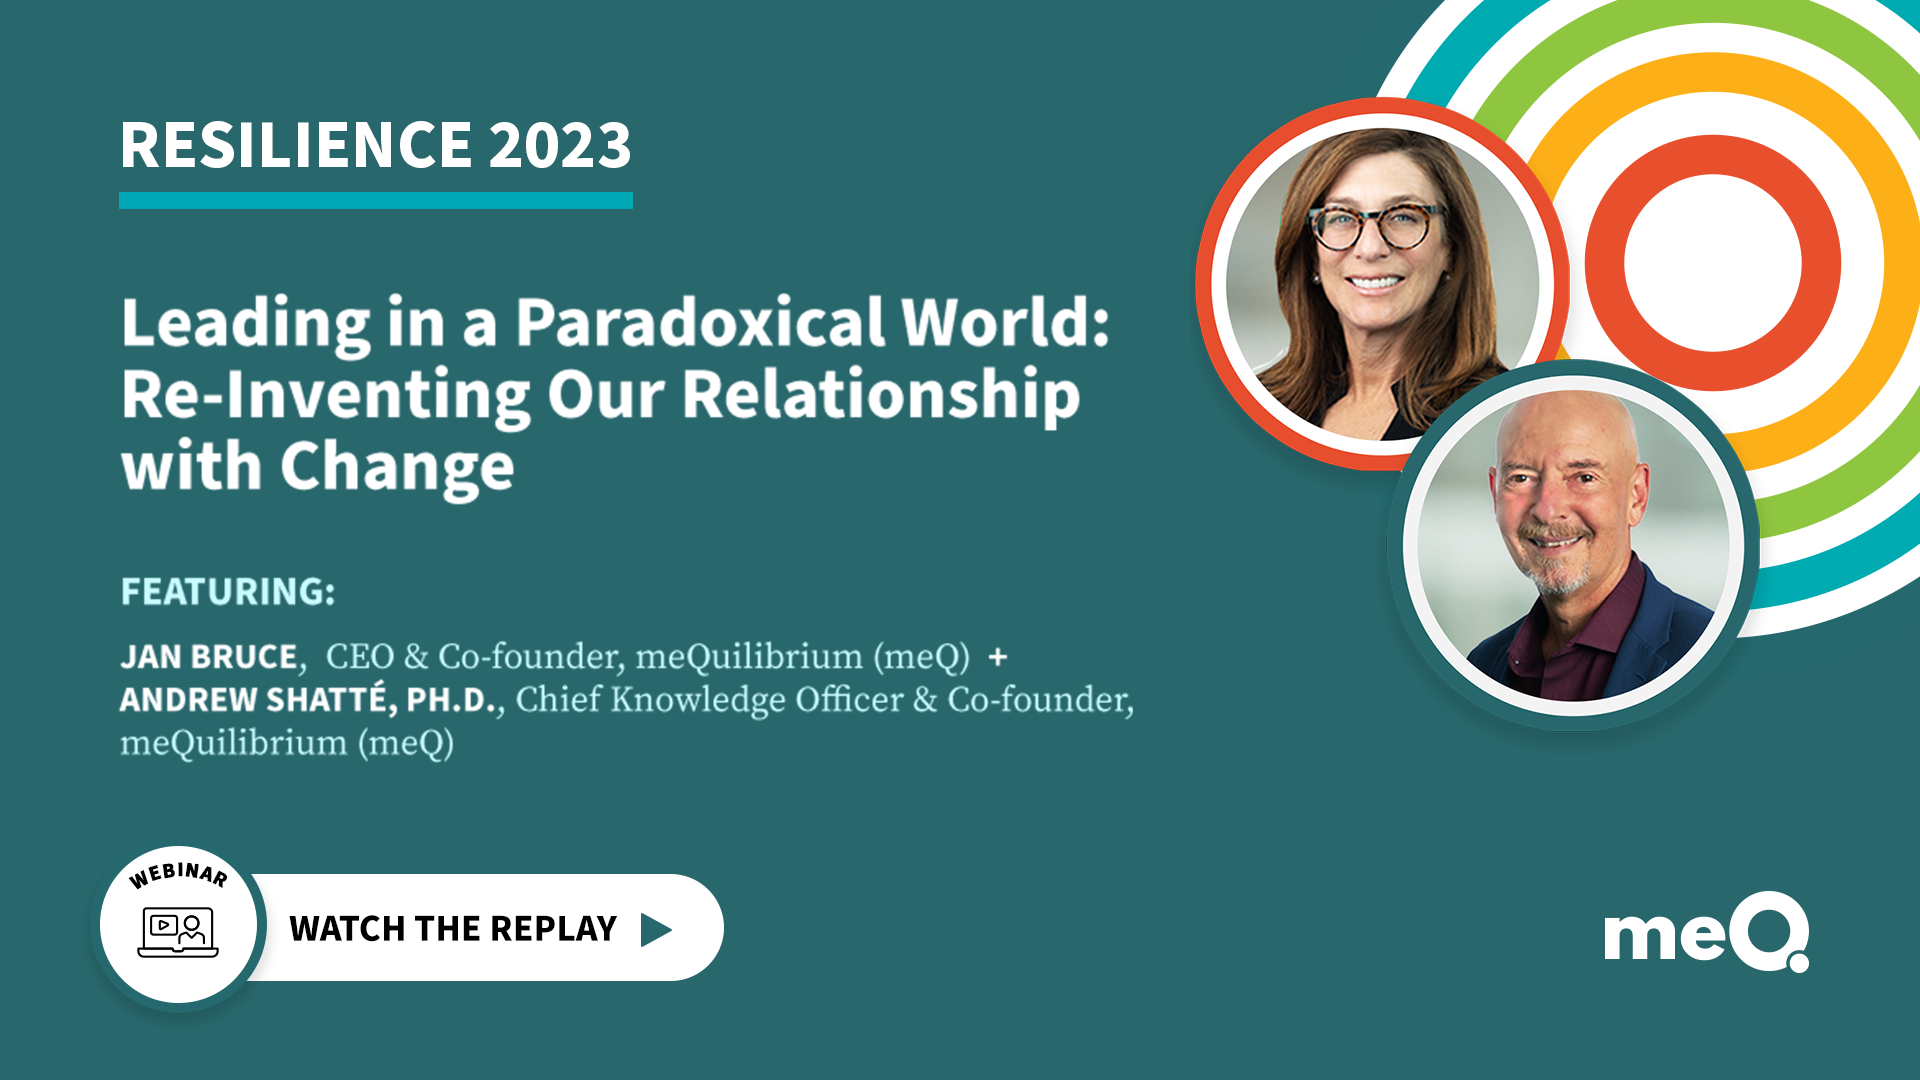 Leading in a Paradoxical World: Re-Inventing Our Relationship with Change